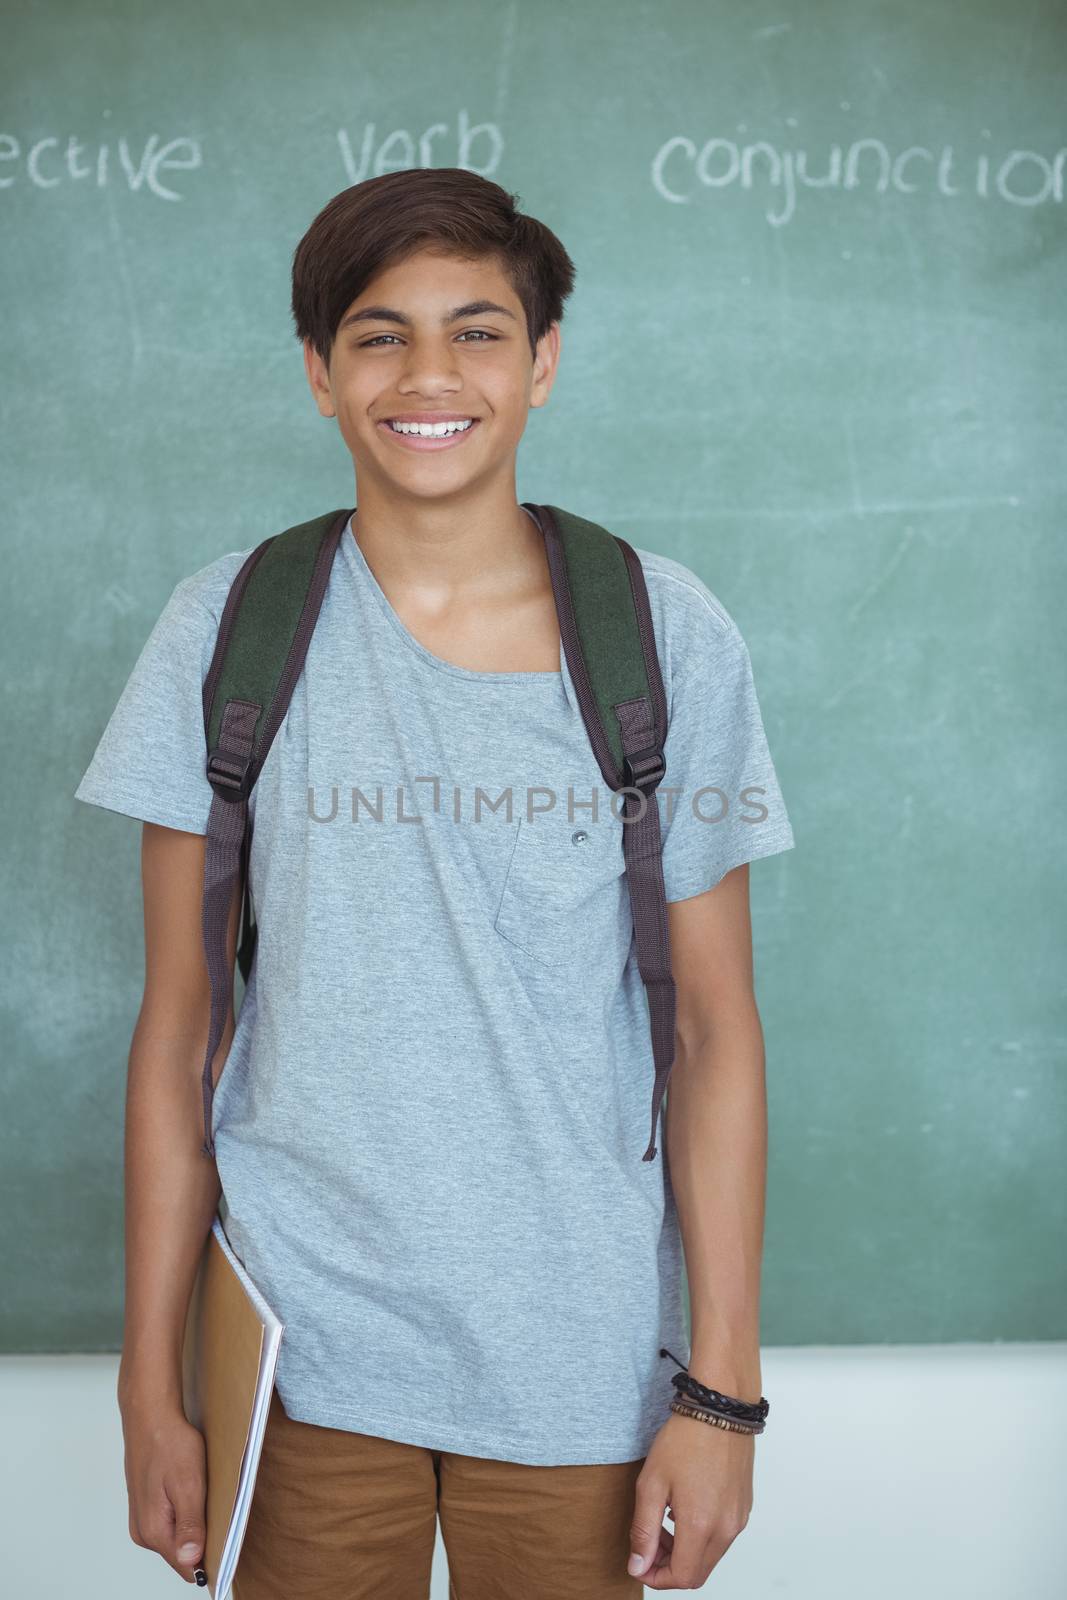 Smiling schoolboy with backpack and book standing against chalkboard in classroom by Wavebreakmedia